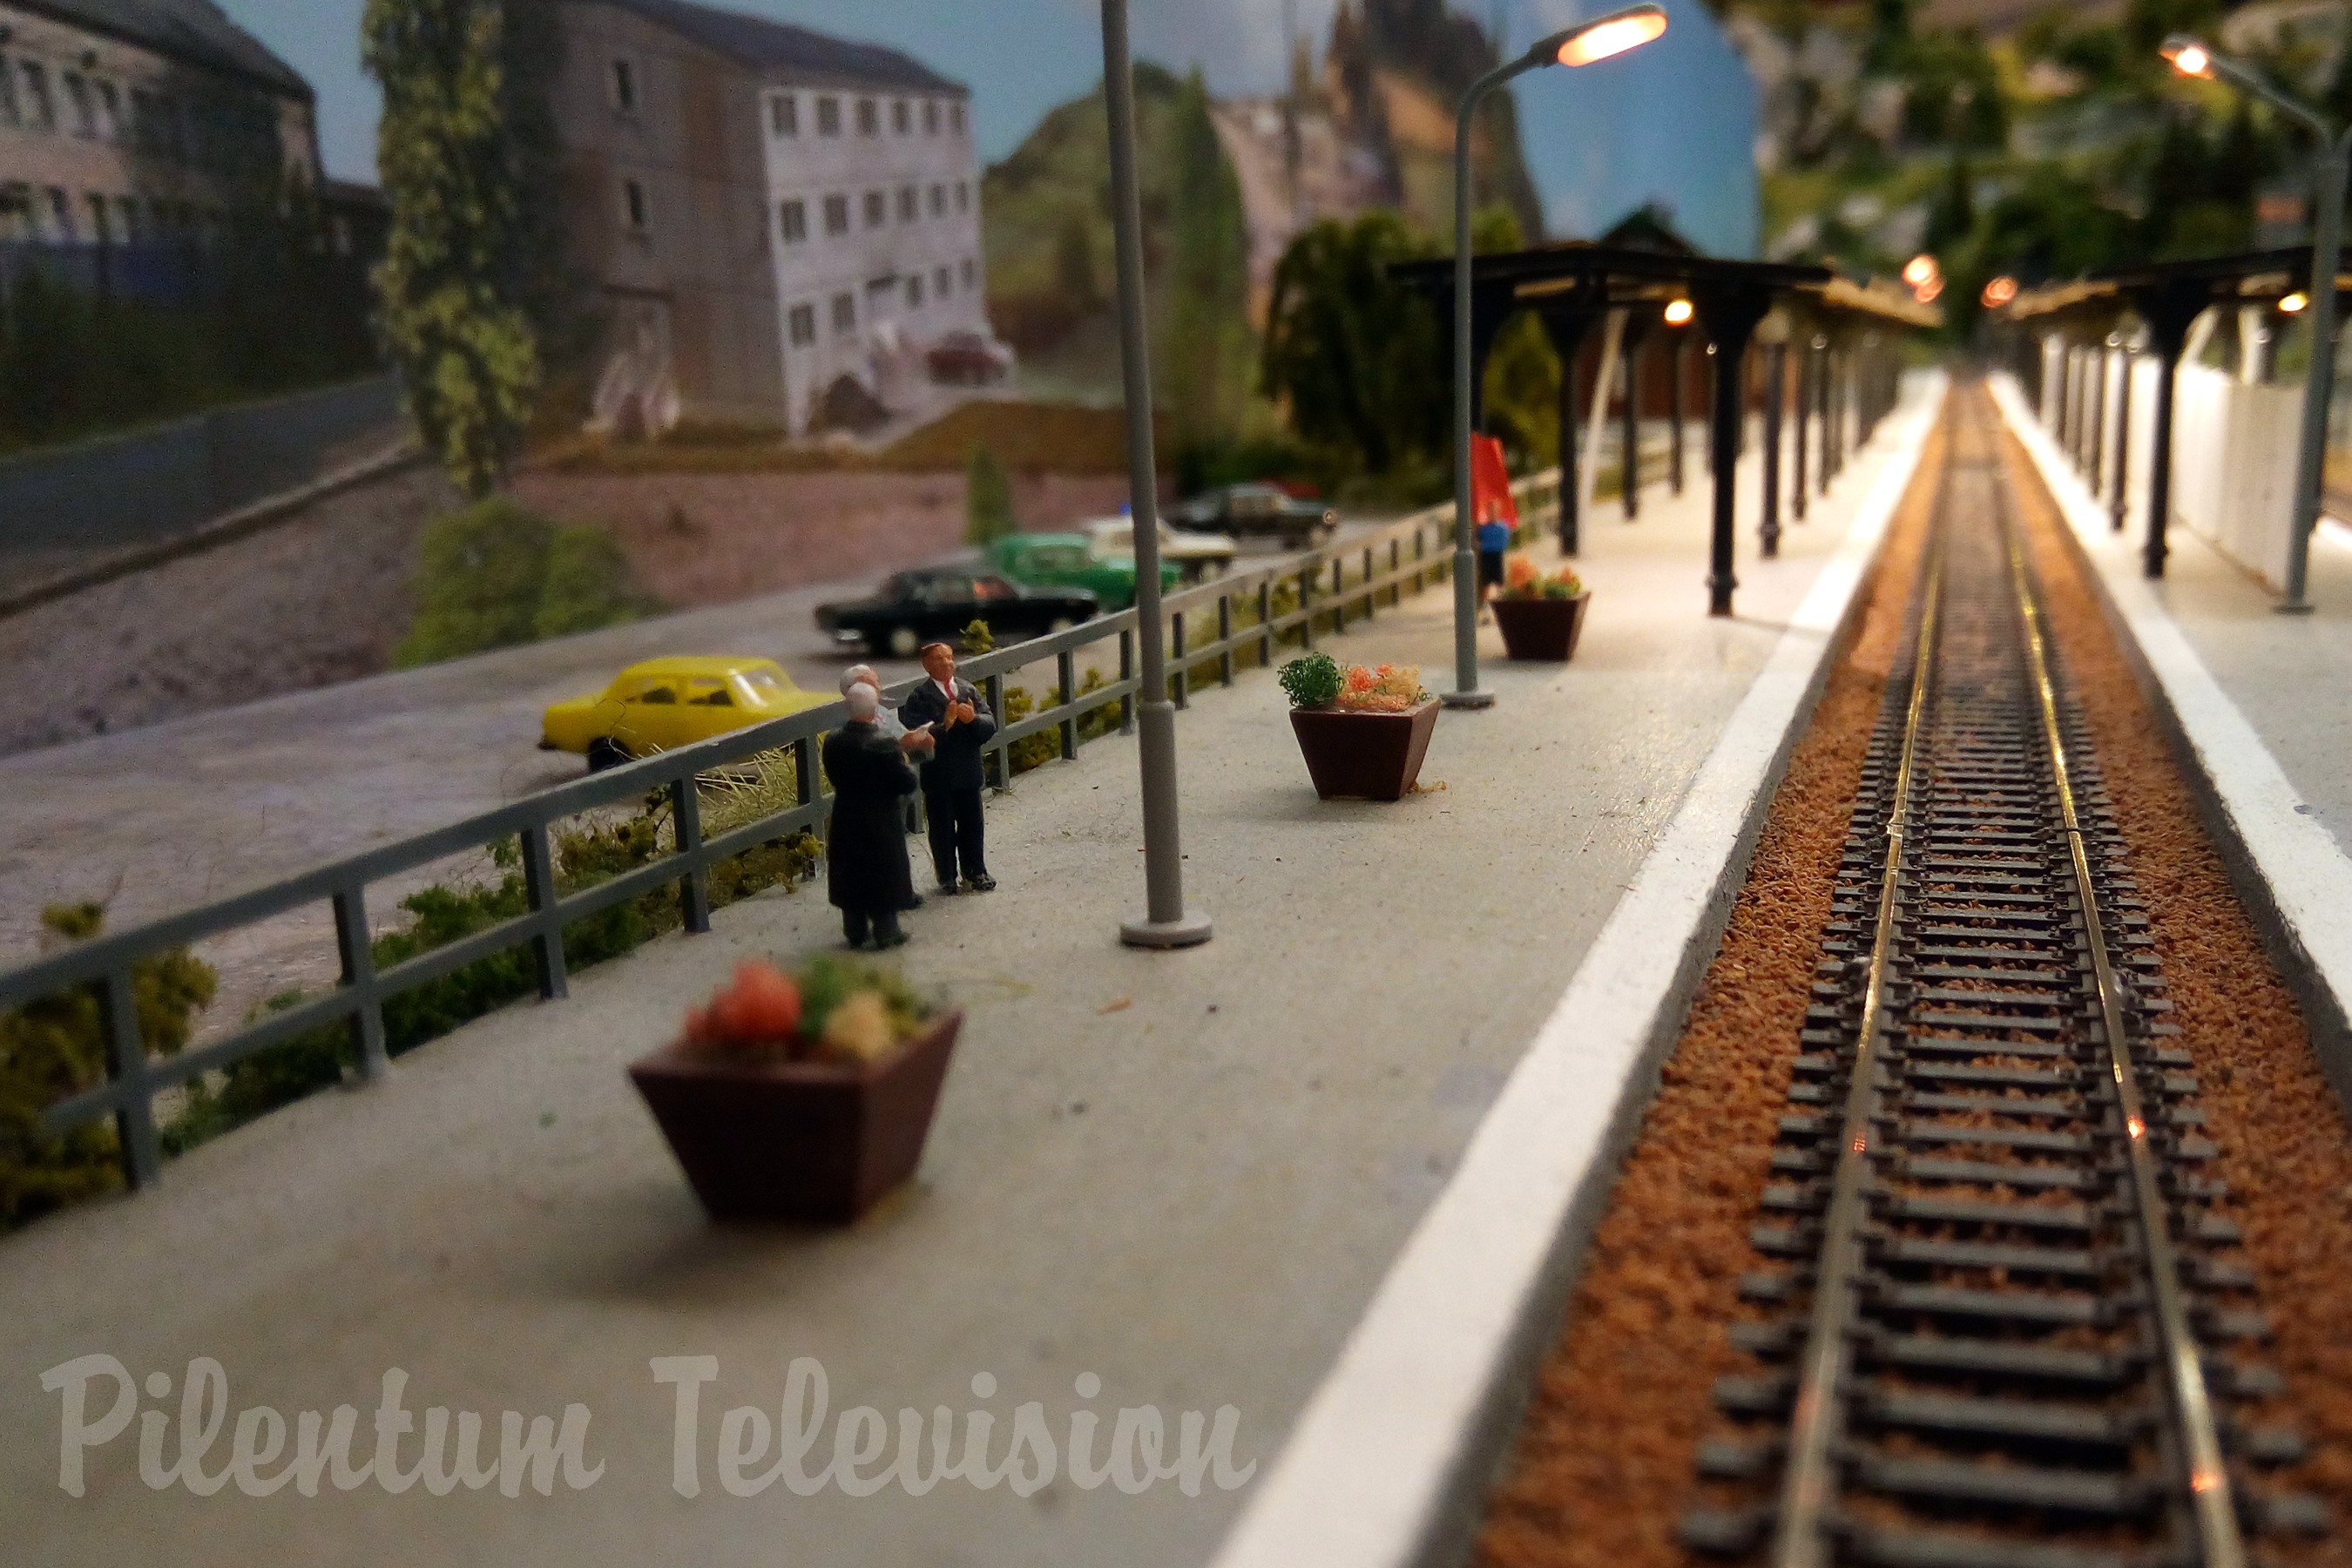 Model trains in action on a TT scale model railway layout with diesel and steam locomotives